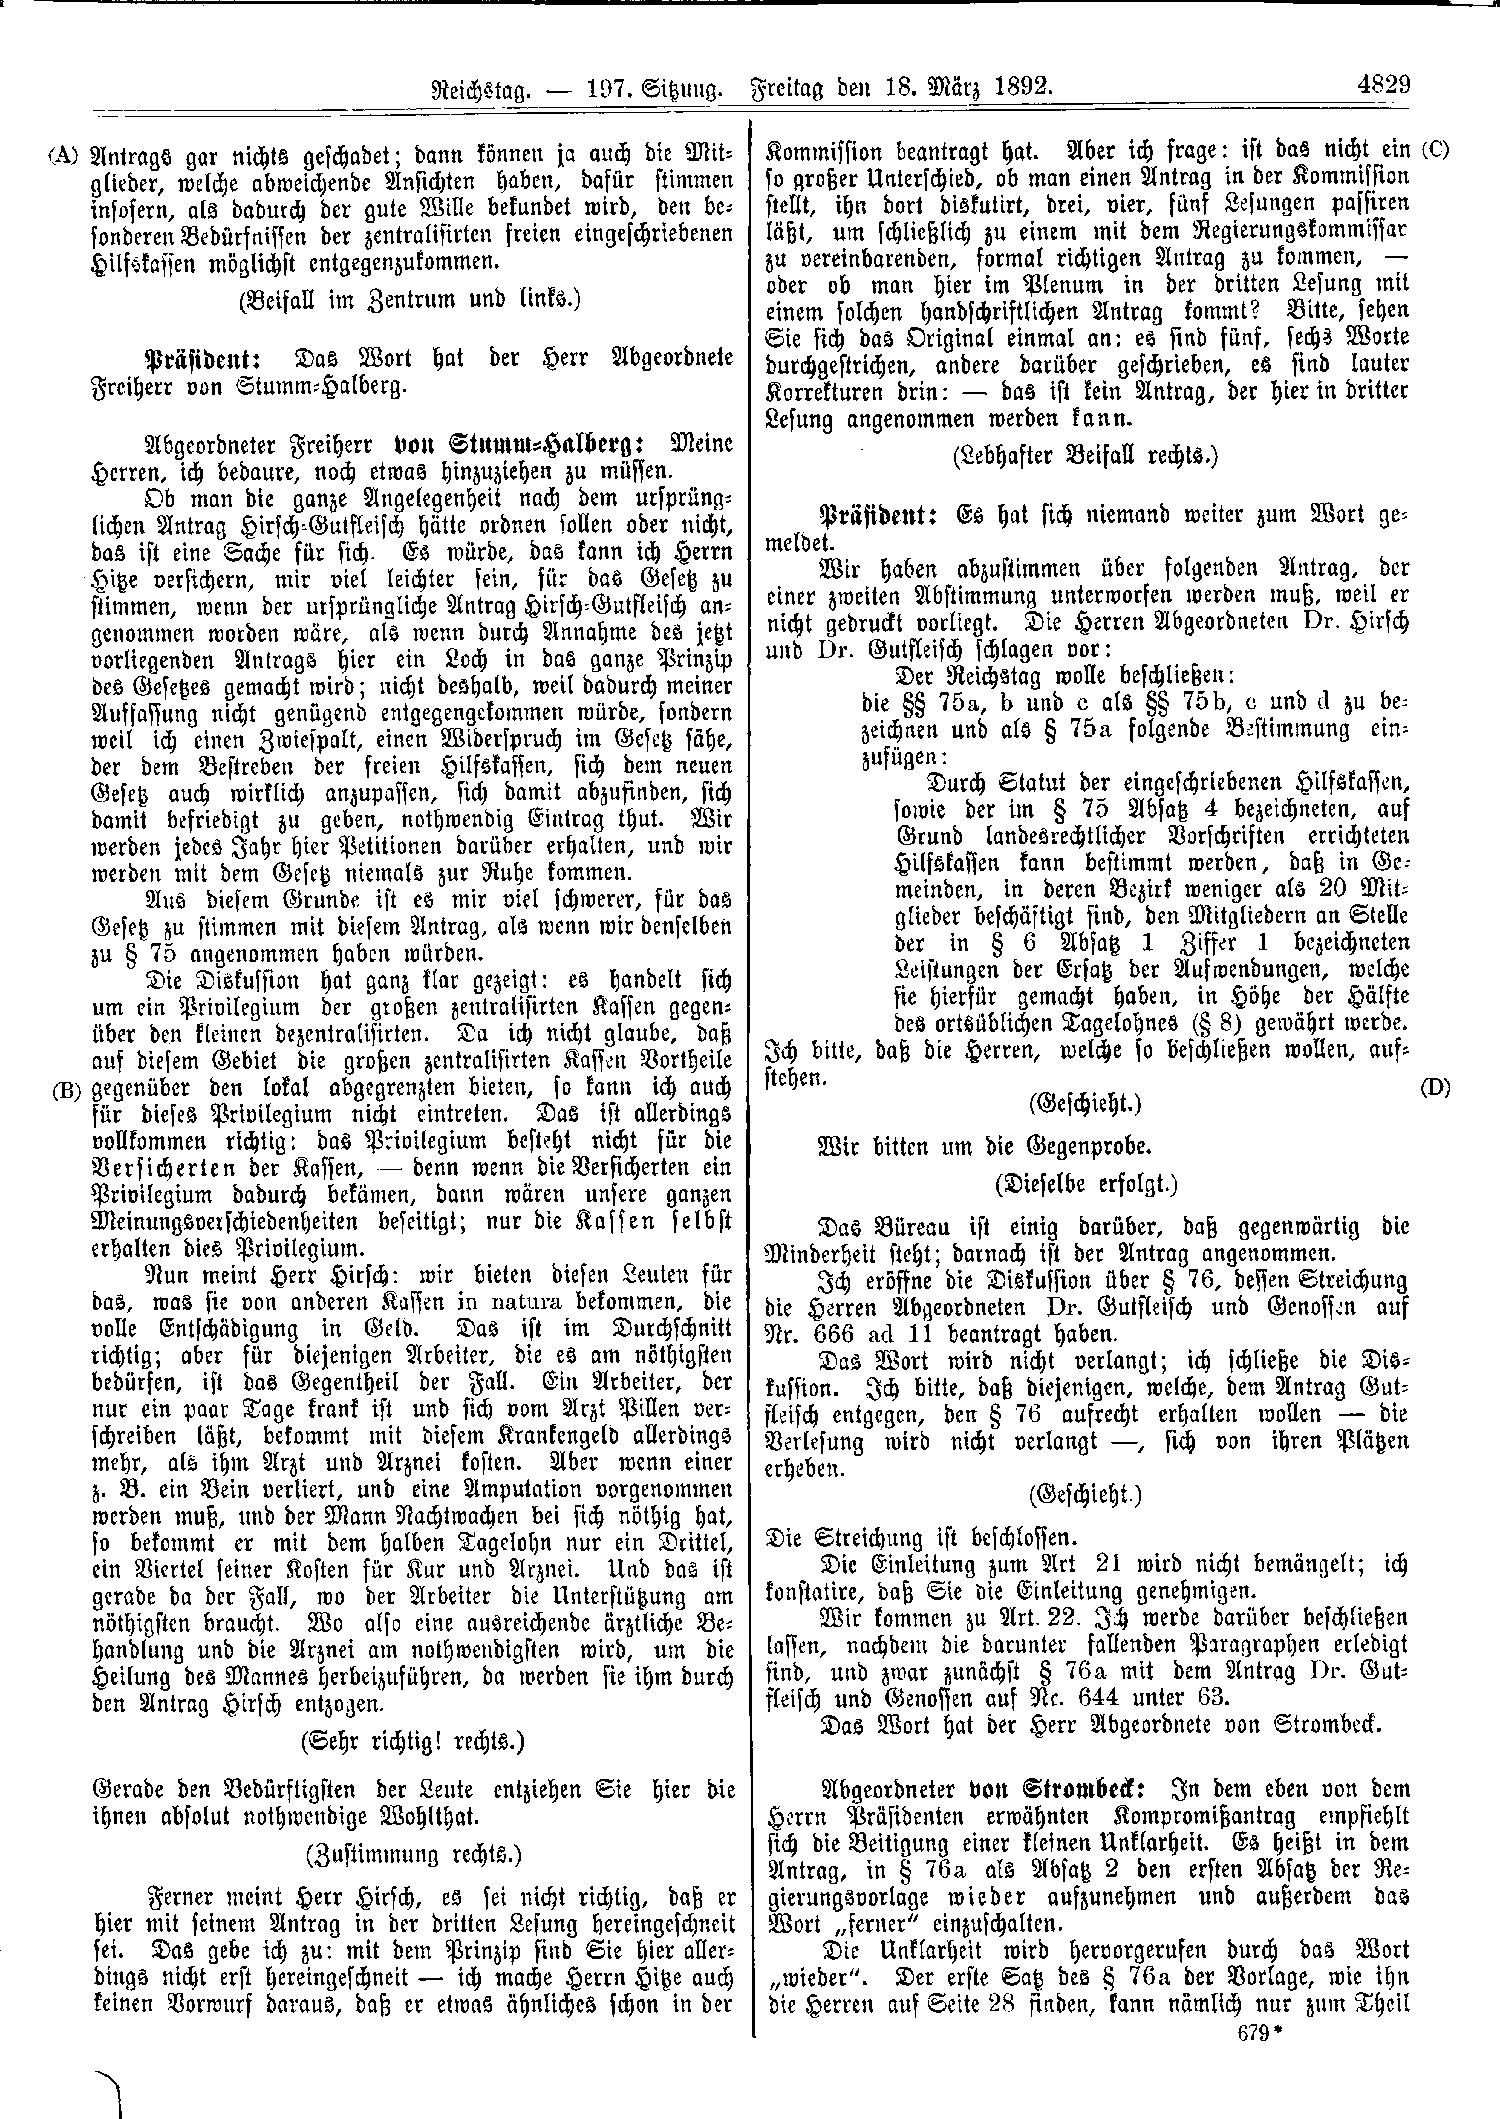 Scan of page 4829